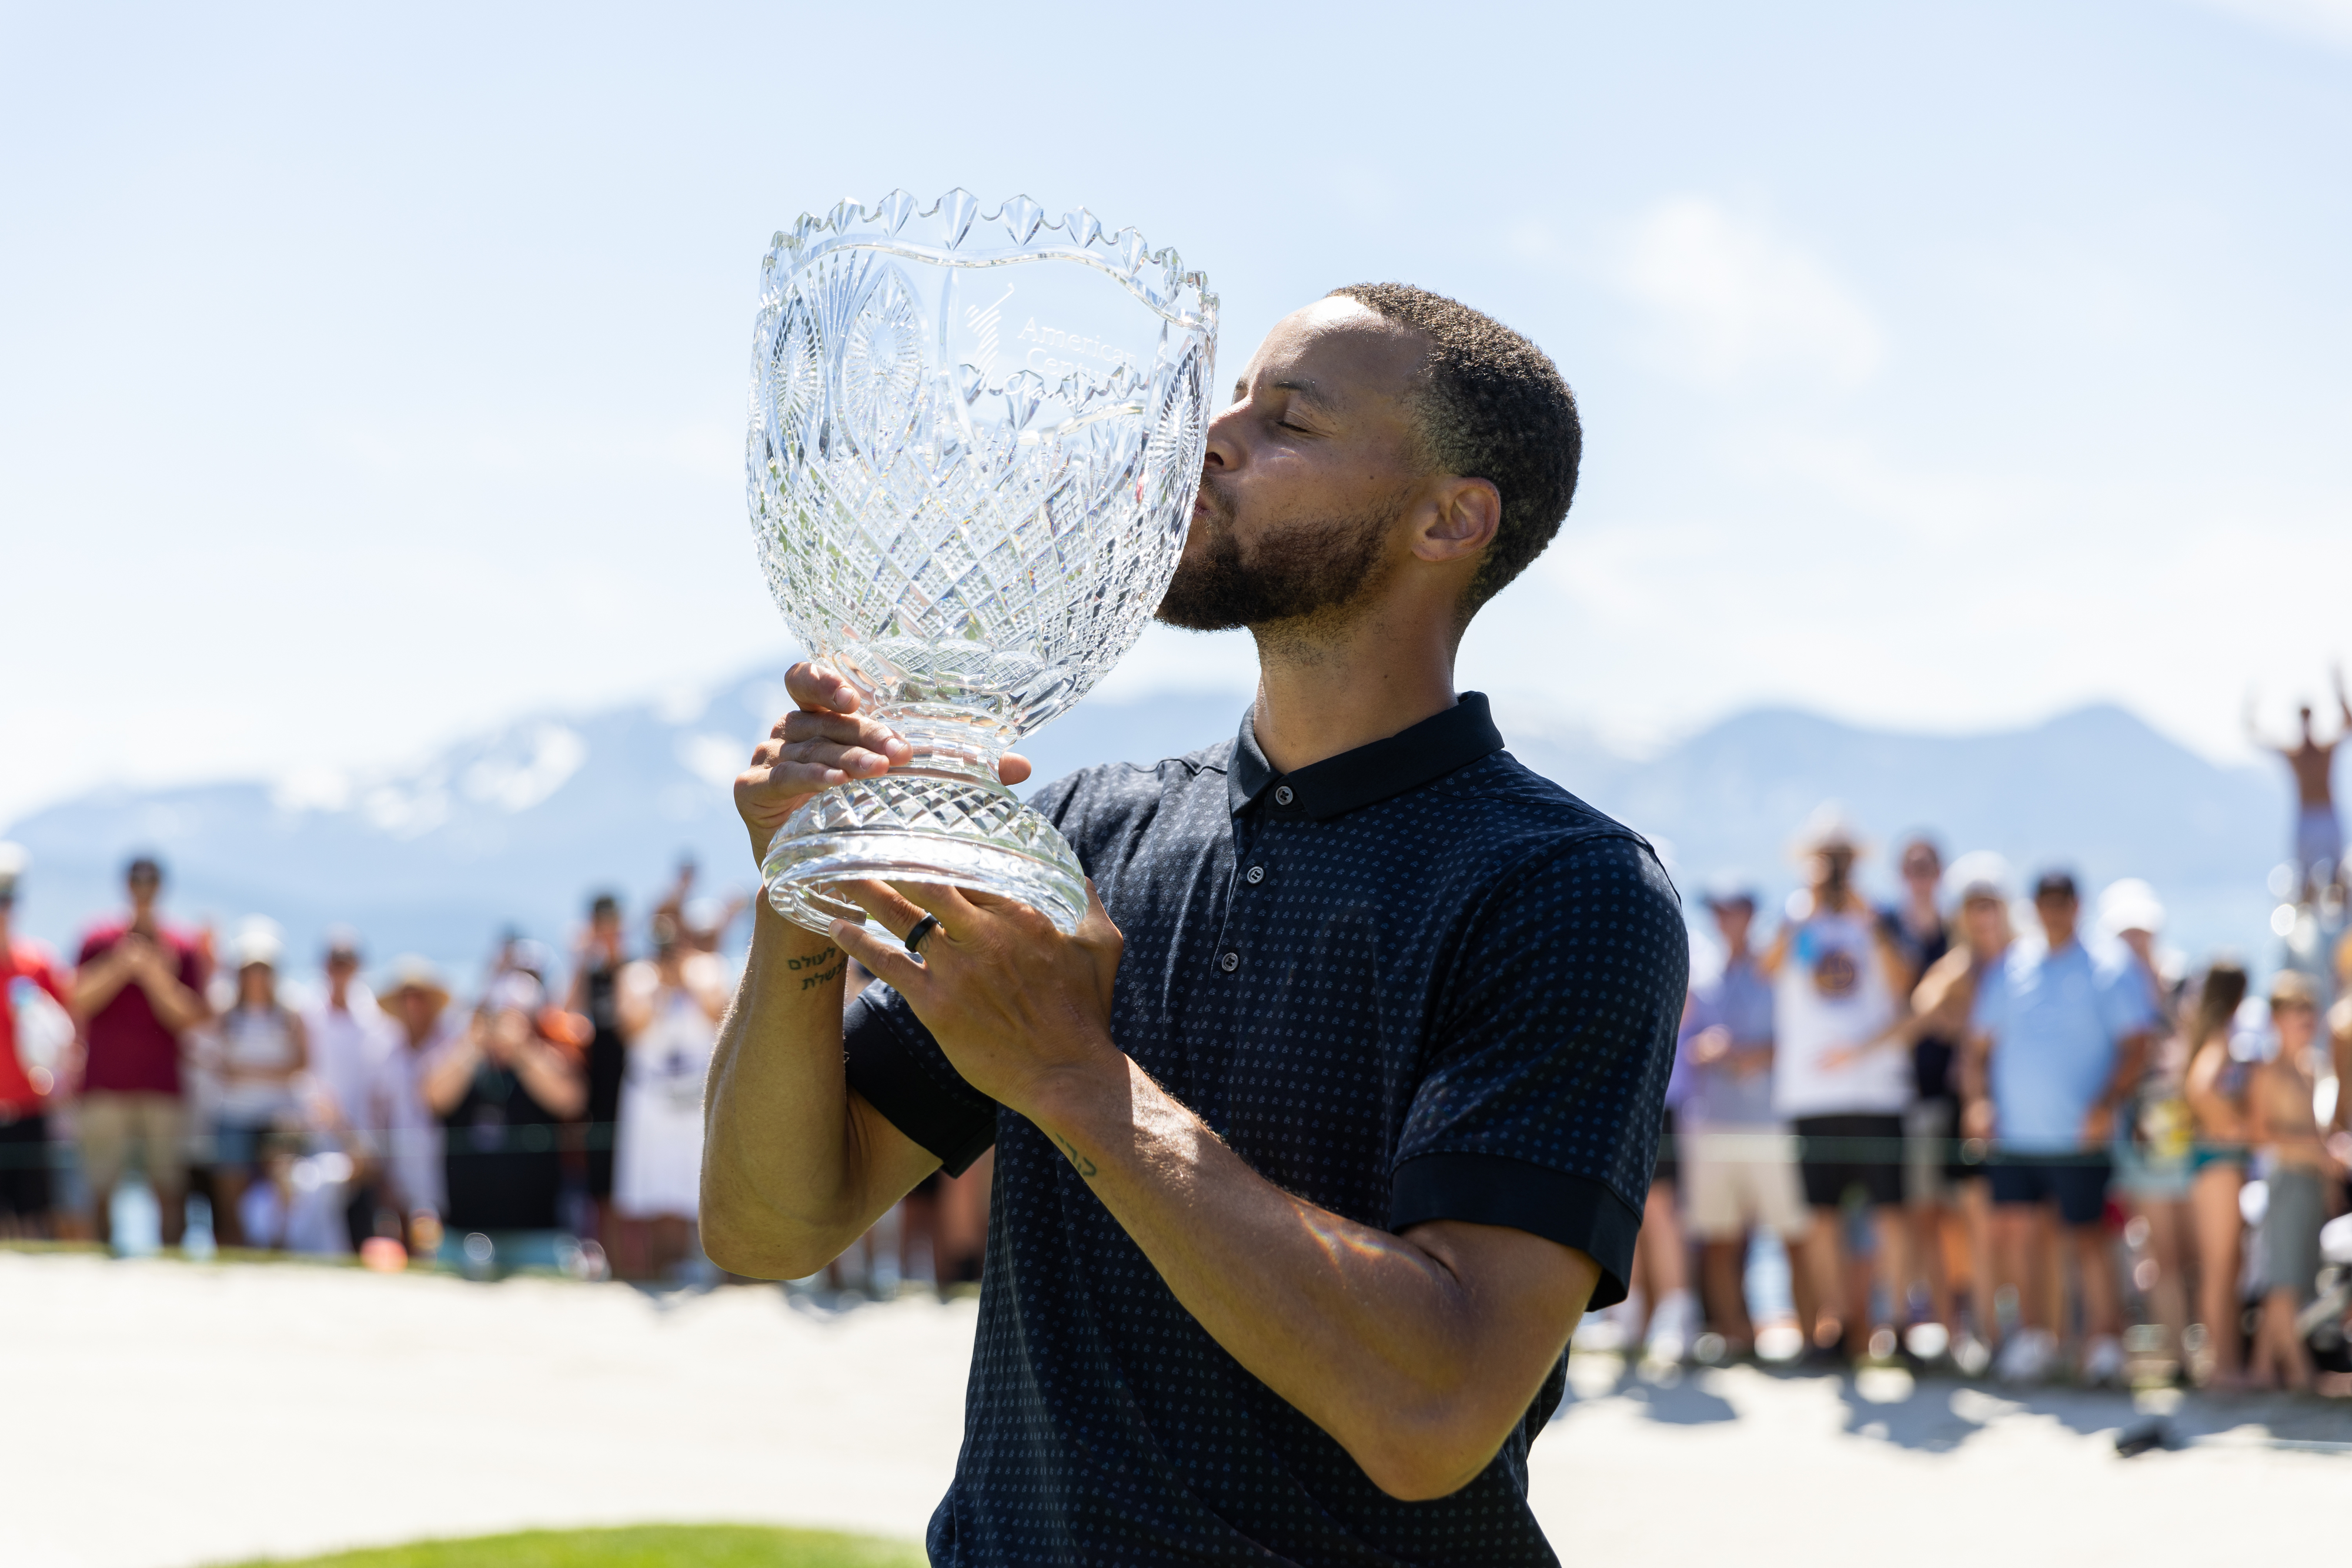 Athlete in polo shirt kisses trophy at golf course with spectators and mountains in the background